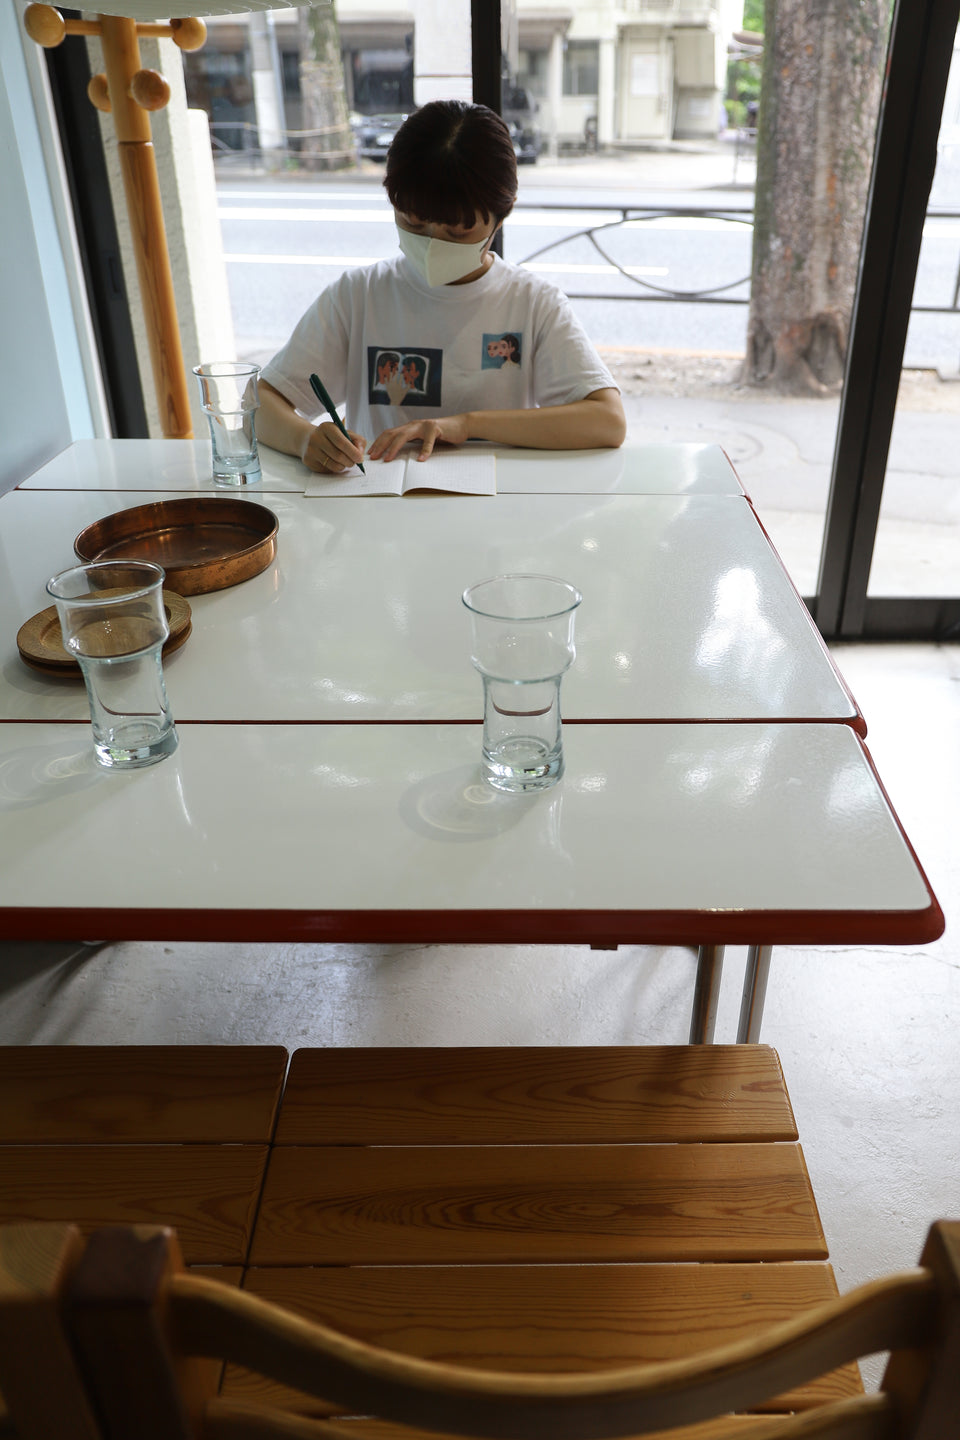 US Vintage Enamel Top Extension Kitchen Table/アメリカヴィンテージ エナメルトップ キッチンテーブル エクステンション